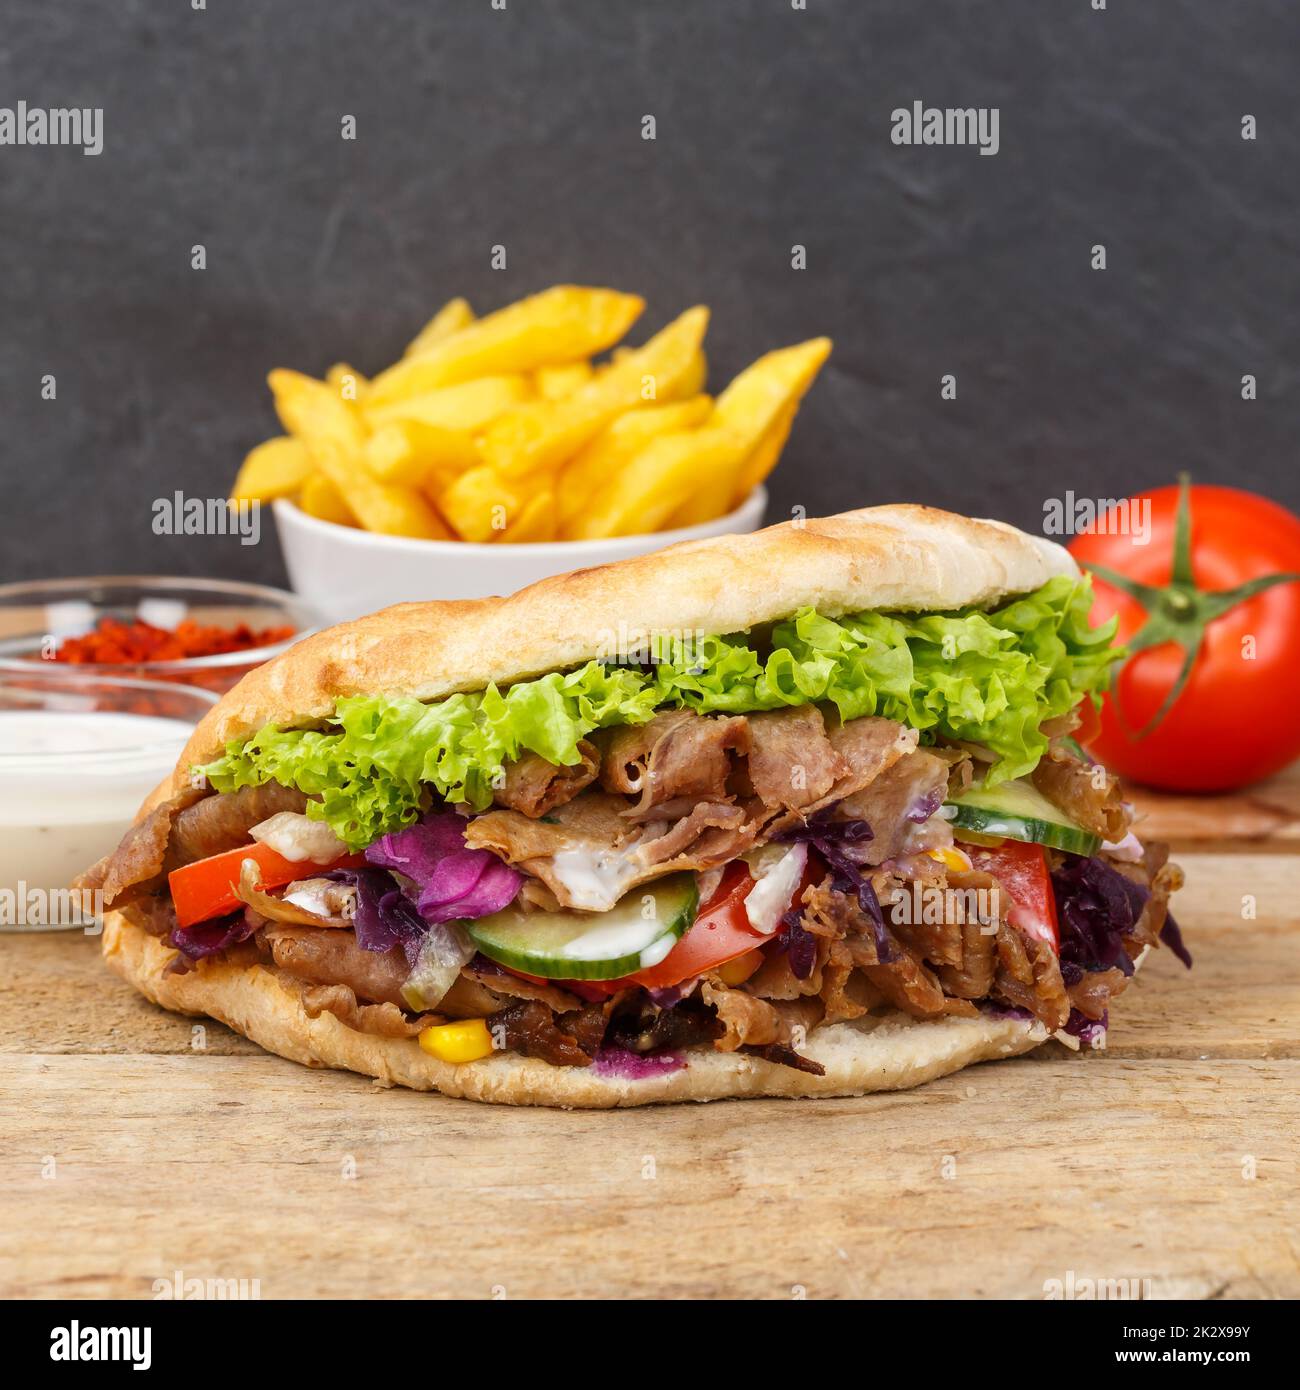 Döner Kebab Doner Kebap fast food in flatbread with fries on a wooden board square snack Stock Photo